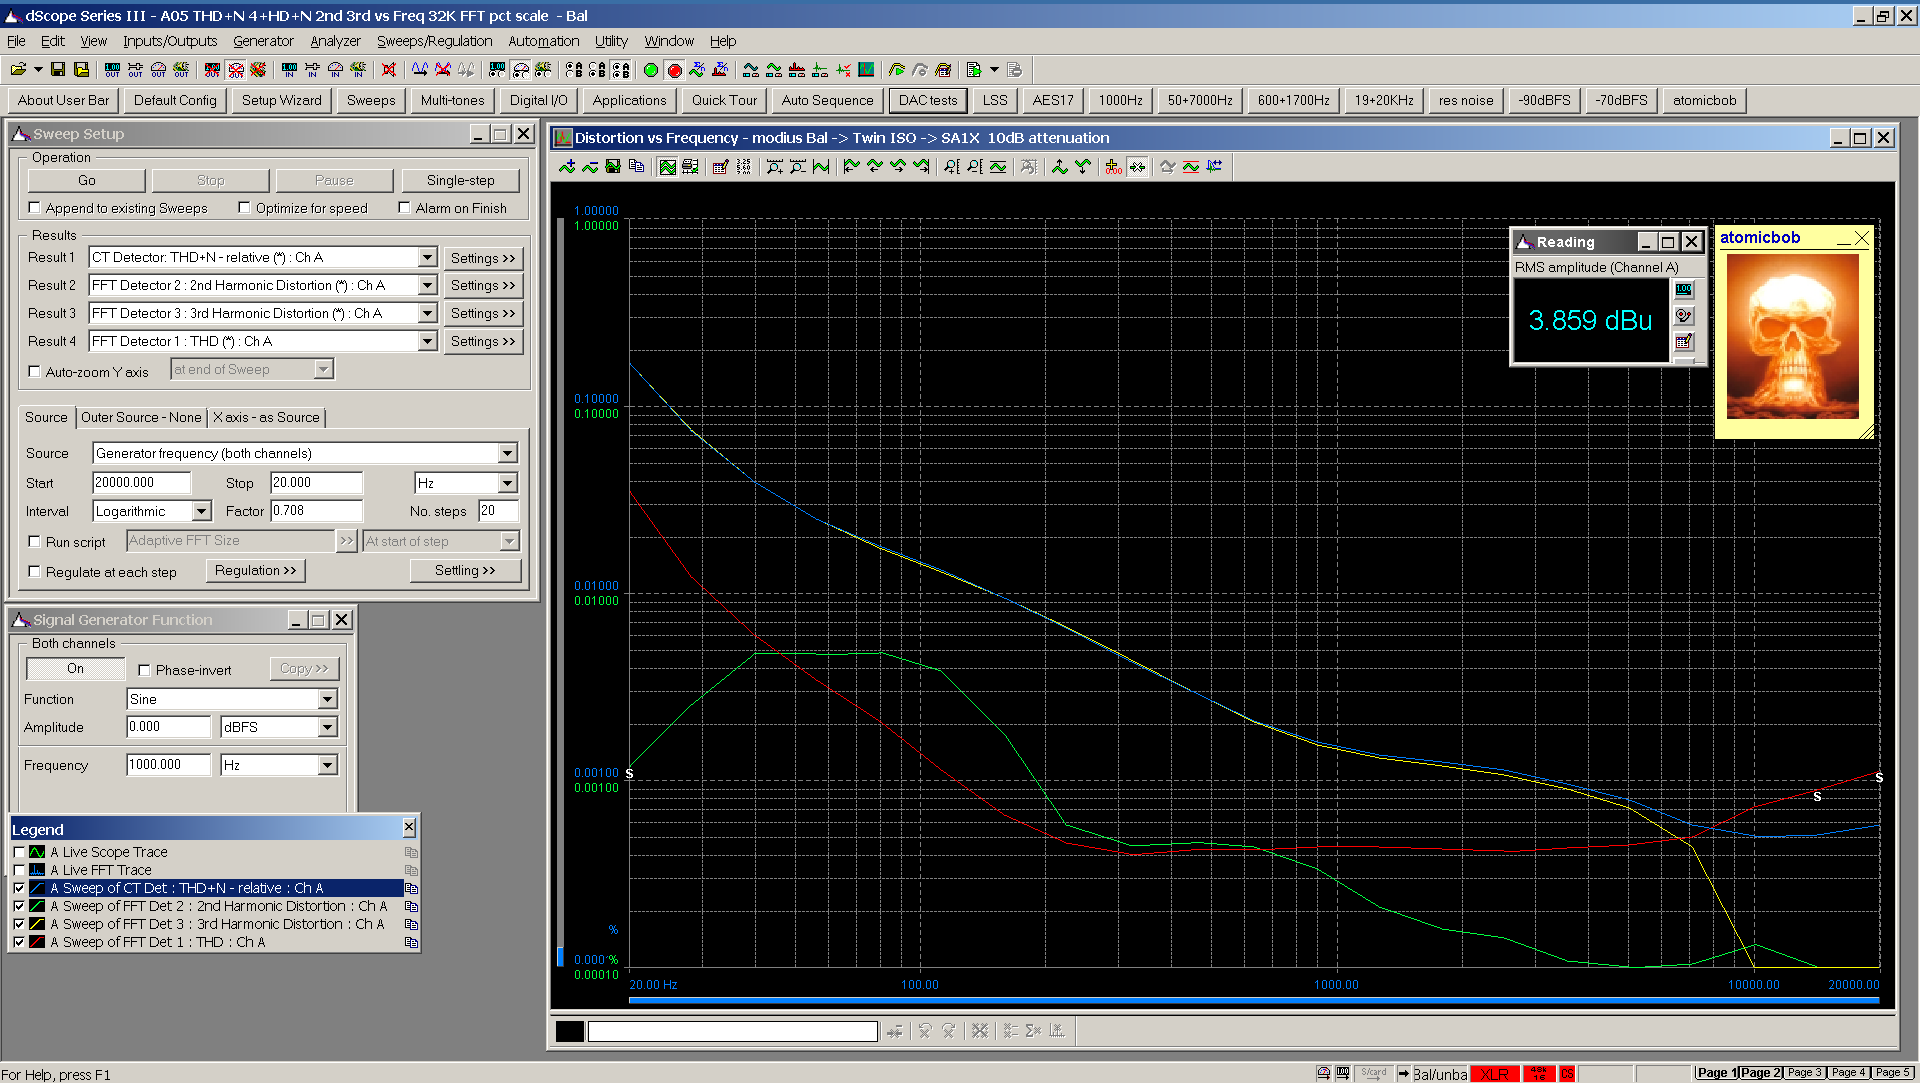 20210206 modius to Twin ISO to SA1X 10 dB attenuation Distortion vs Frequency pct scale.png